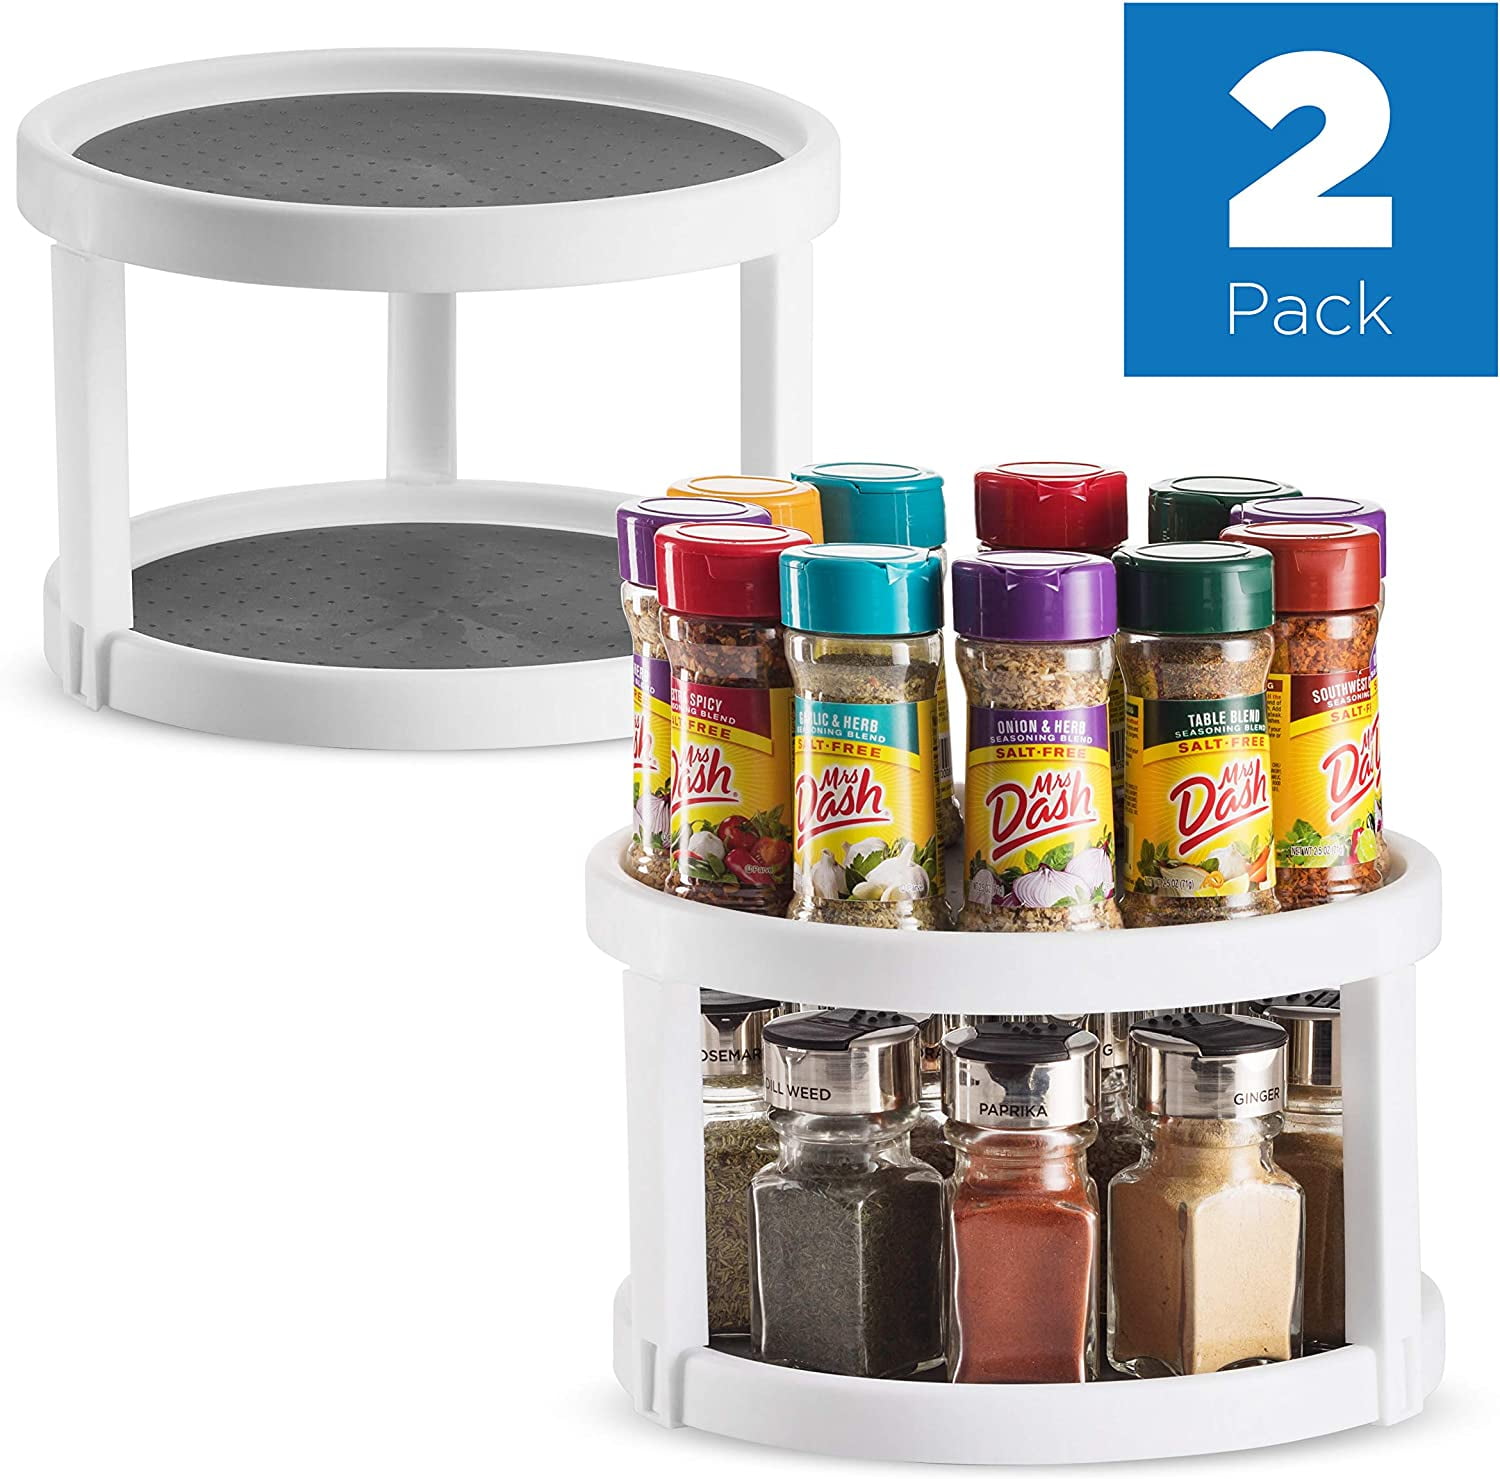 Countertop Pantry 2 Tier Lazy Susan Turntable 11 Inch Spice Rack Organizer for Kitchen Cabinet Height Adjustable Cabinet Organizer with Clear Removable Bins 